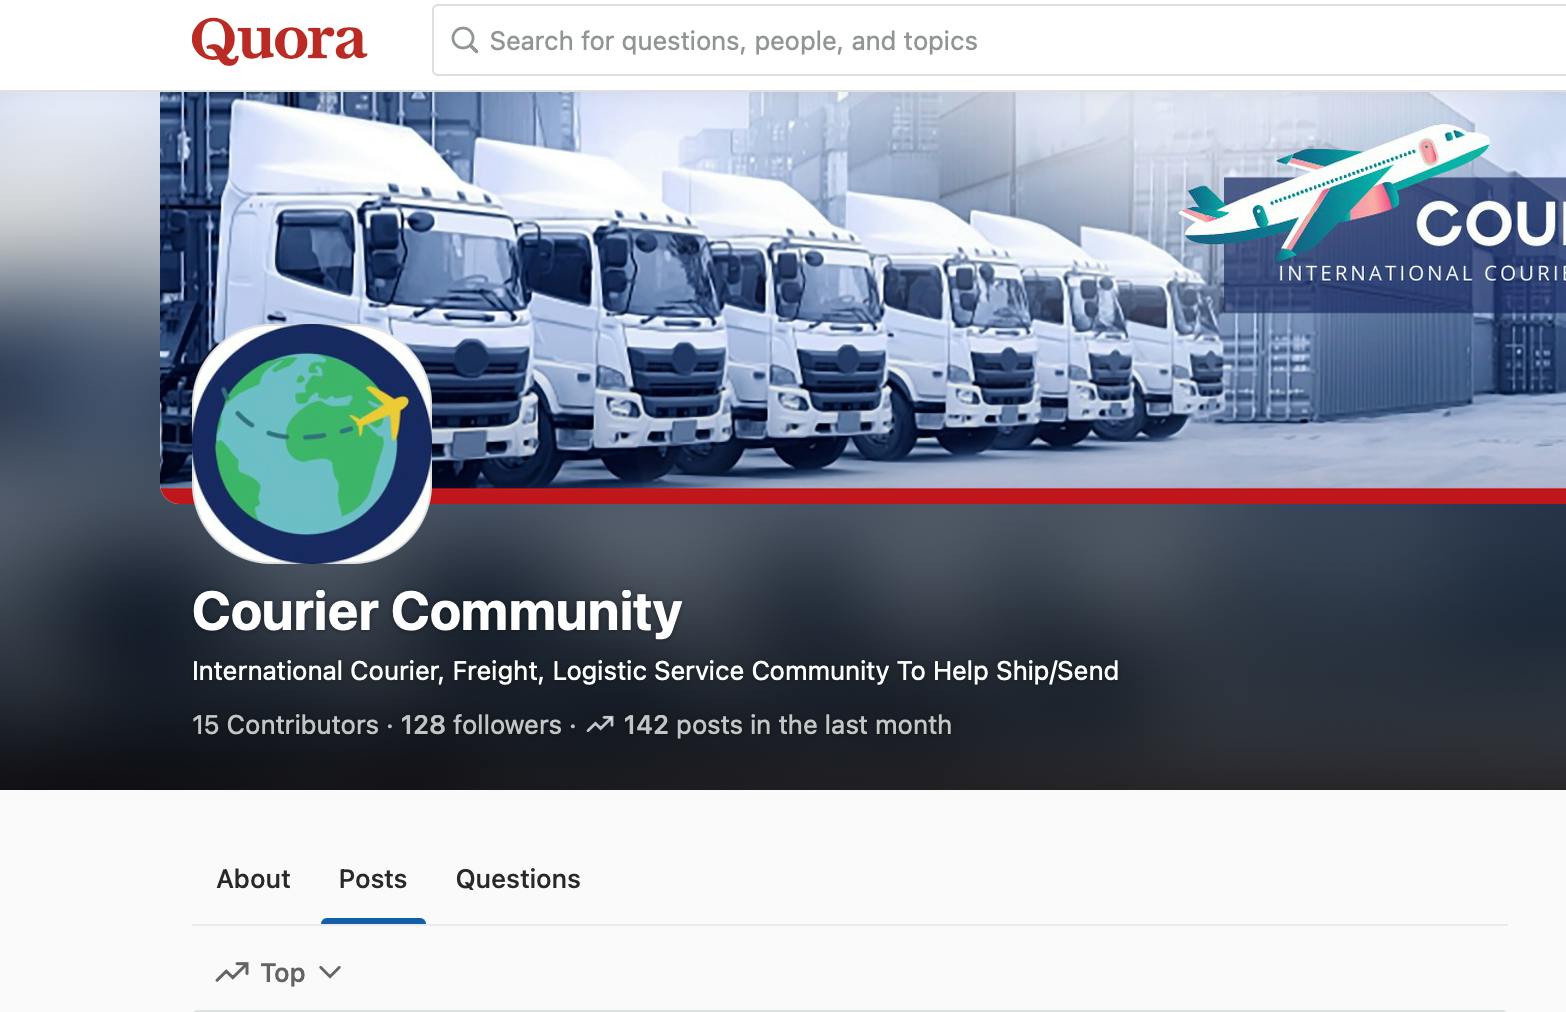 Courier Community Quora Space